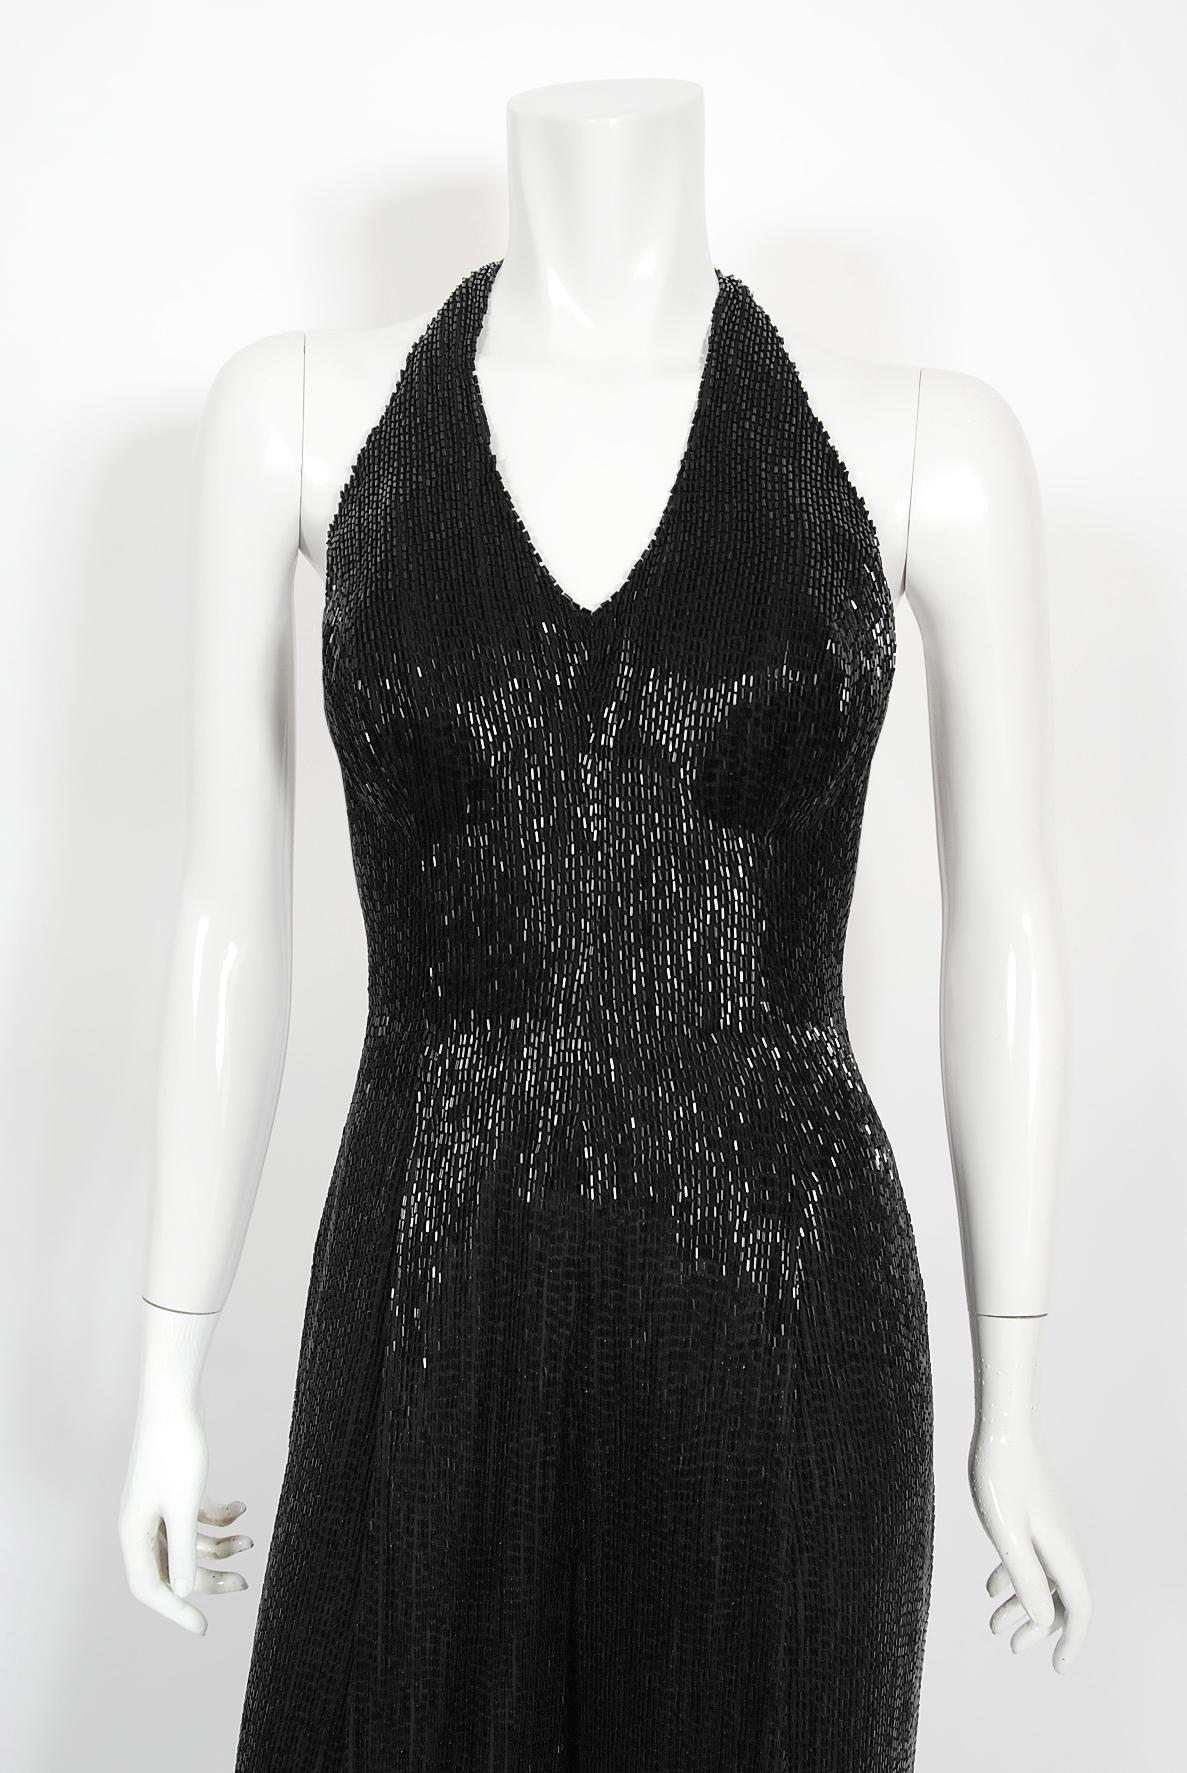 An ultra chic and incredibly timeless custom couture black fully-beaded jumpsuit dating back to the late 1970's. This captivating showstopper was designed by the famous 'J & M Costumers' in Hollywood; who still do specialized work for the